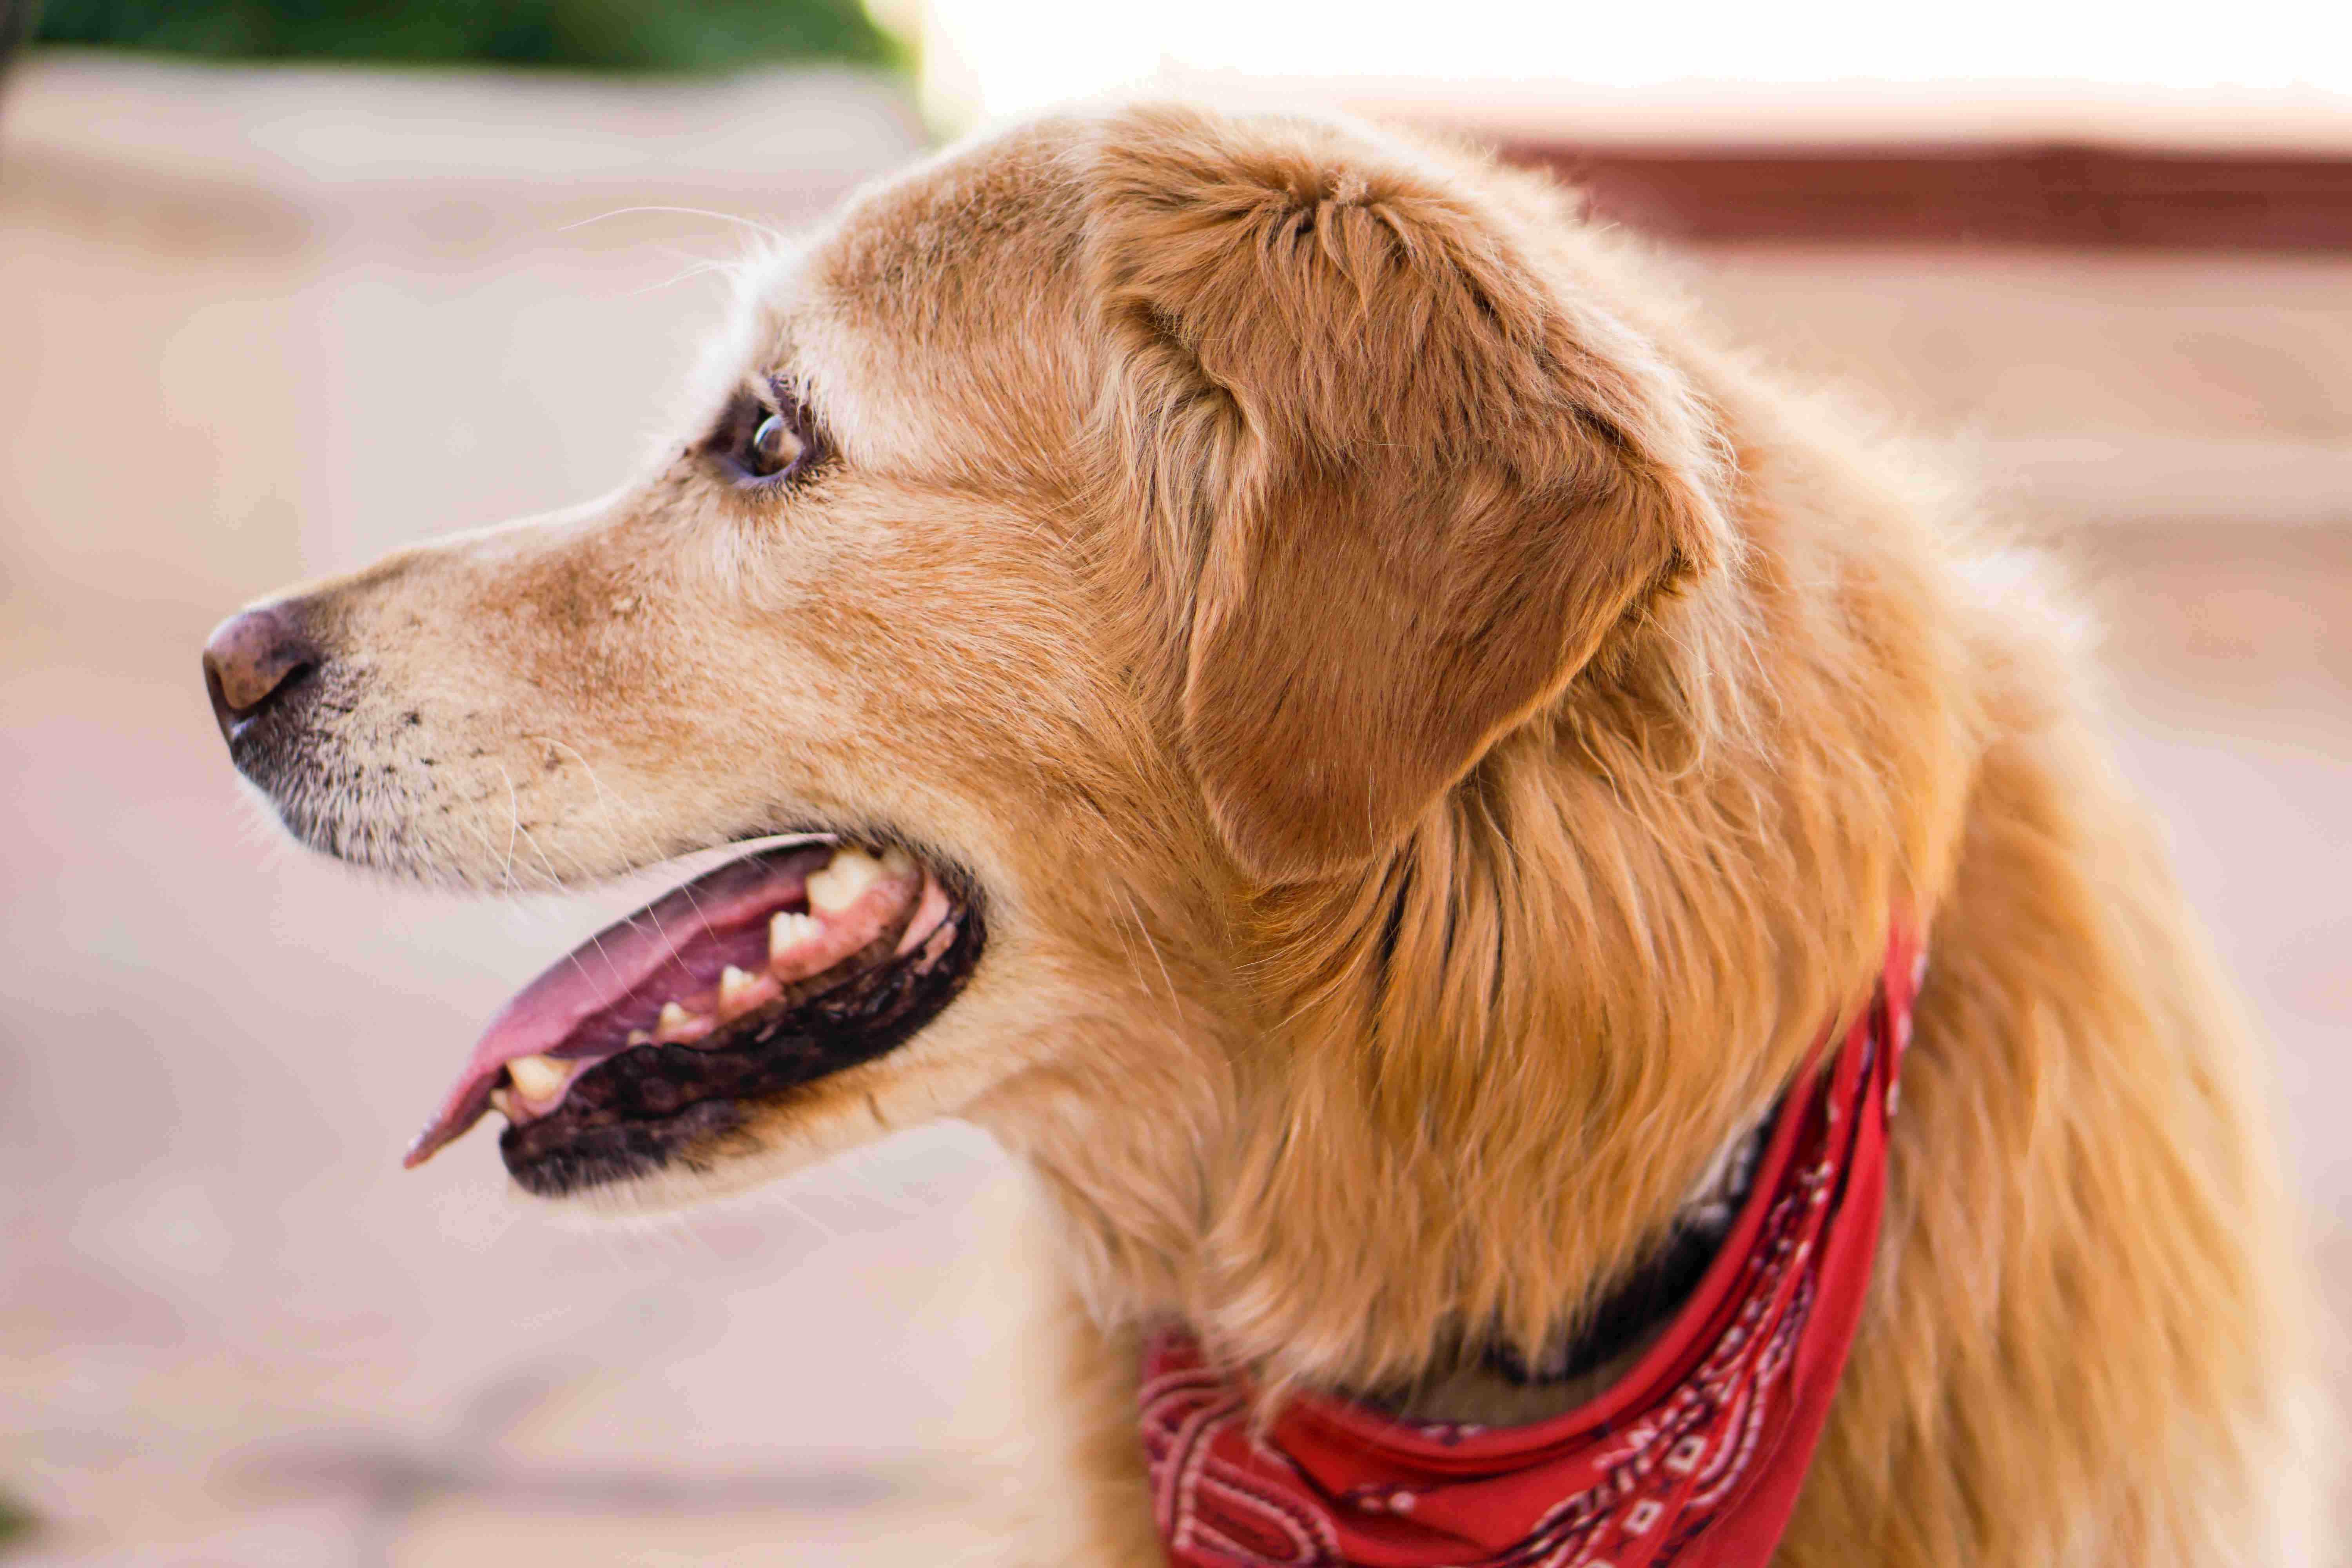 What are some effective ways to prevent ear infections in golden retrievers?